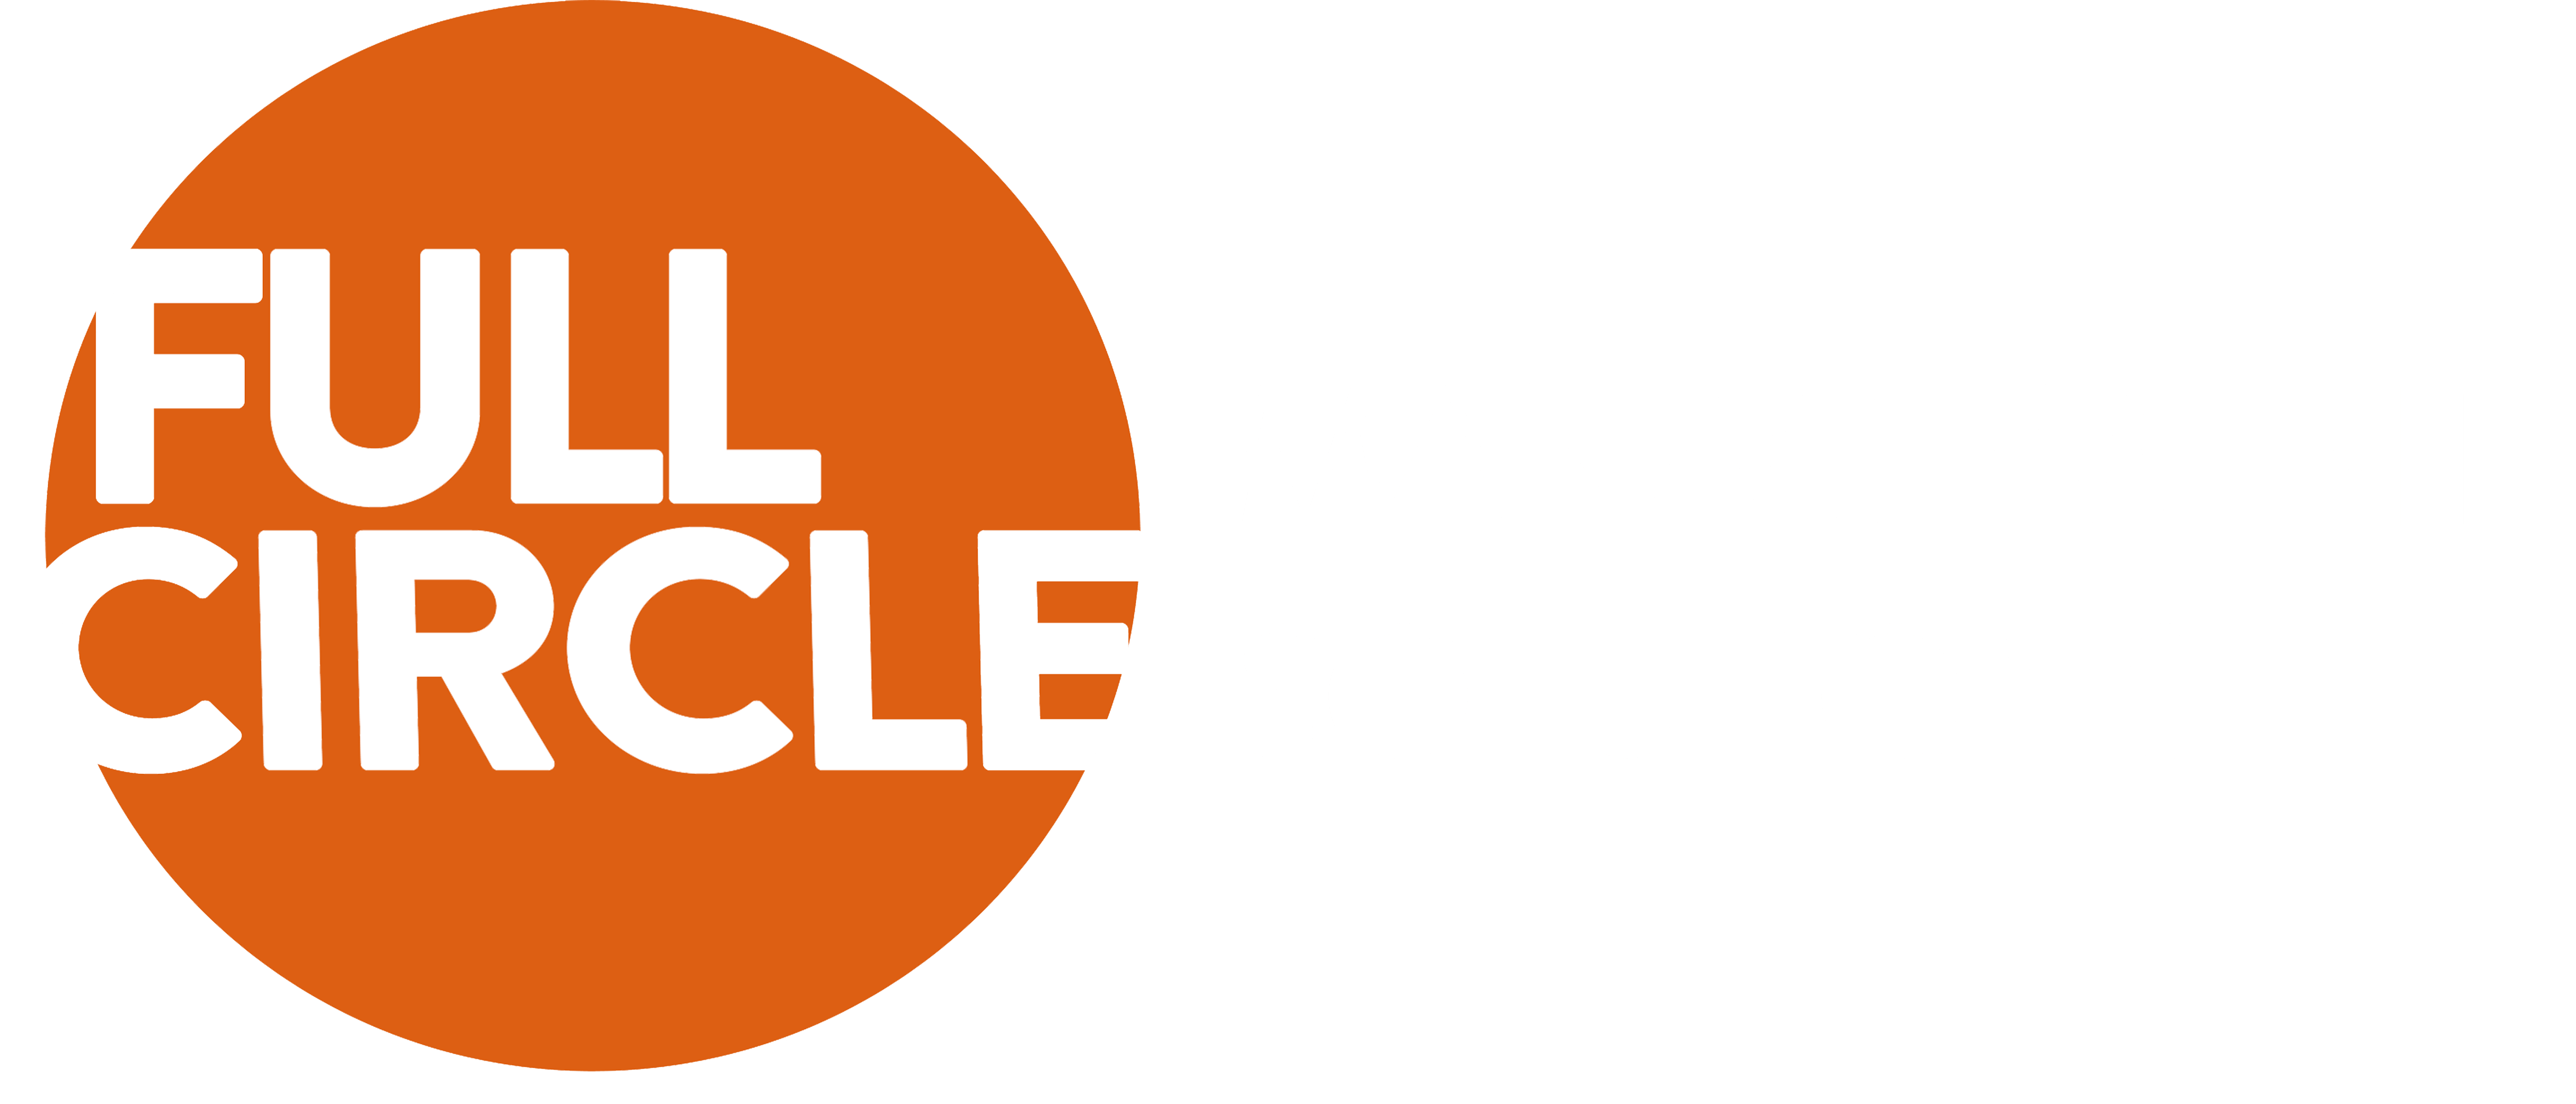 Full Circle Logo - Full Circle Management Solutions ¦ Business Consultancy ¦ Talent ...